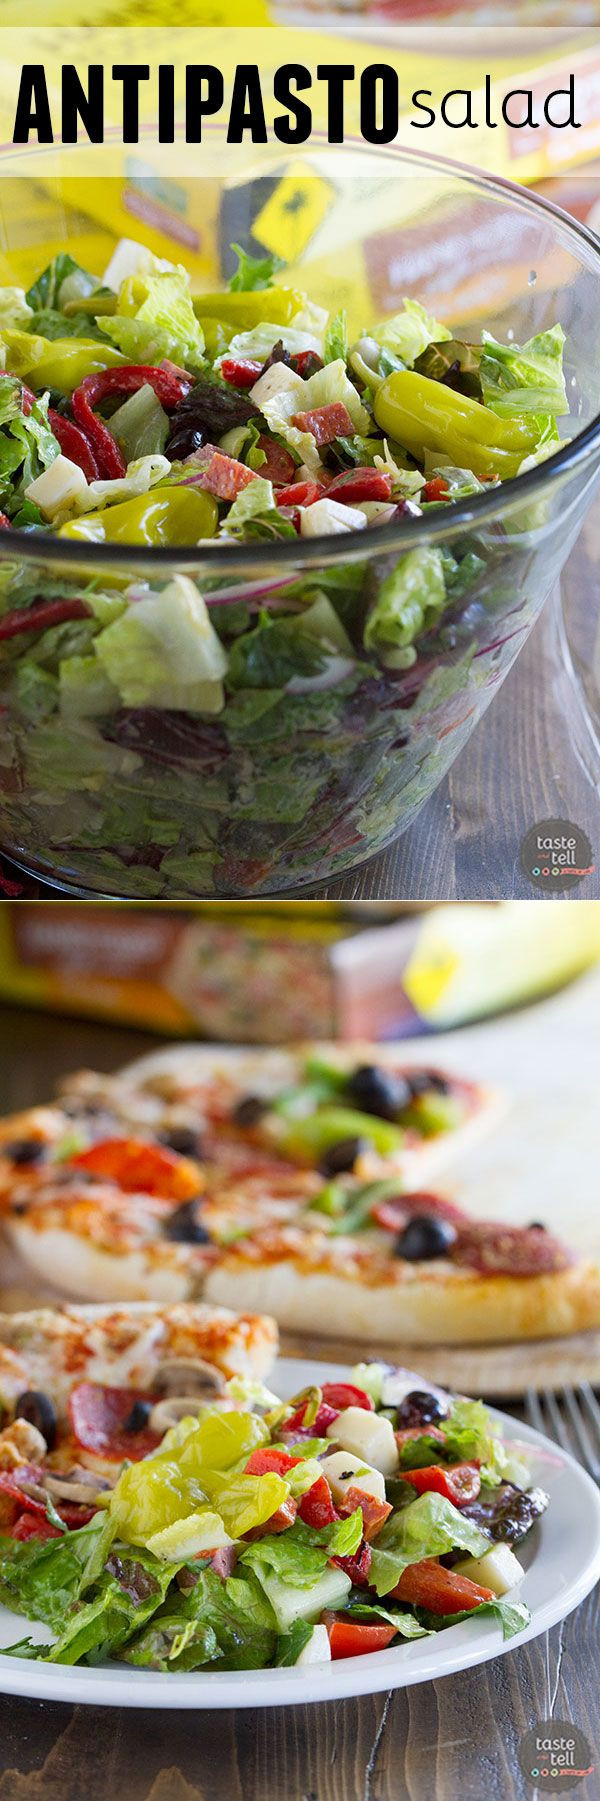 Healthy Side Dishes For Pizza
 A perfect side dish for pizza night this Antipasto Salad